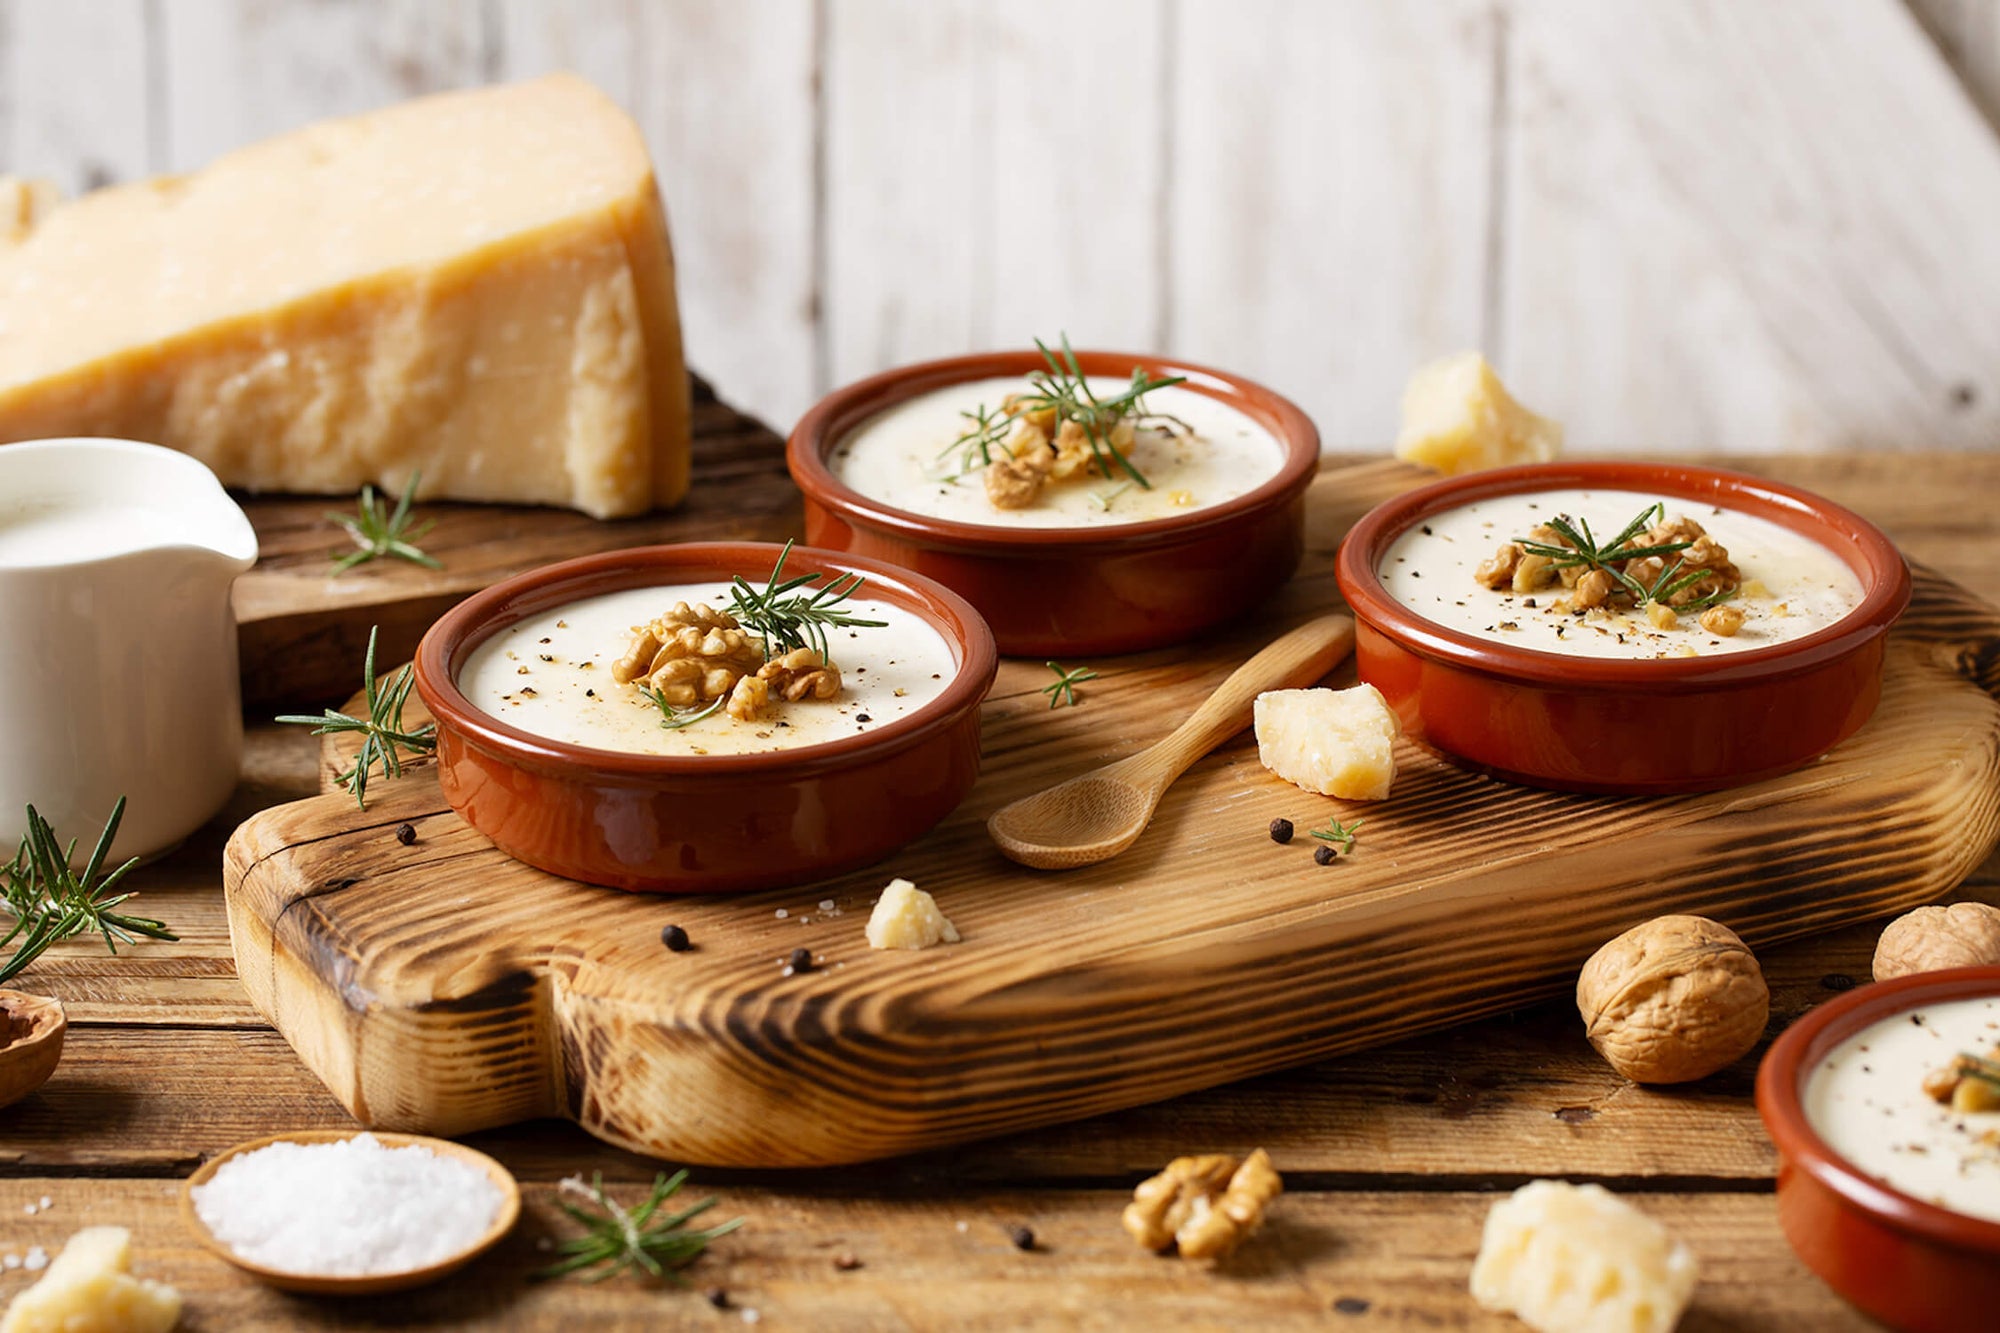 SAVORY PANNA COTTA with Parmigiano Reggiano cheese, walnuts, rosemary, pepper, and honey